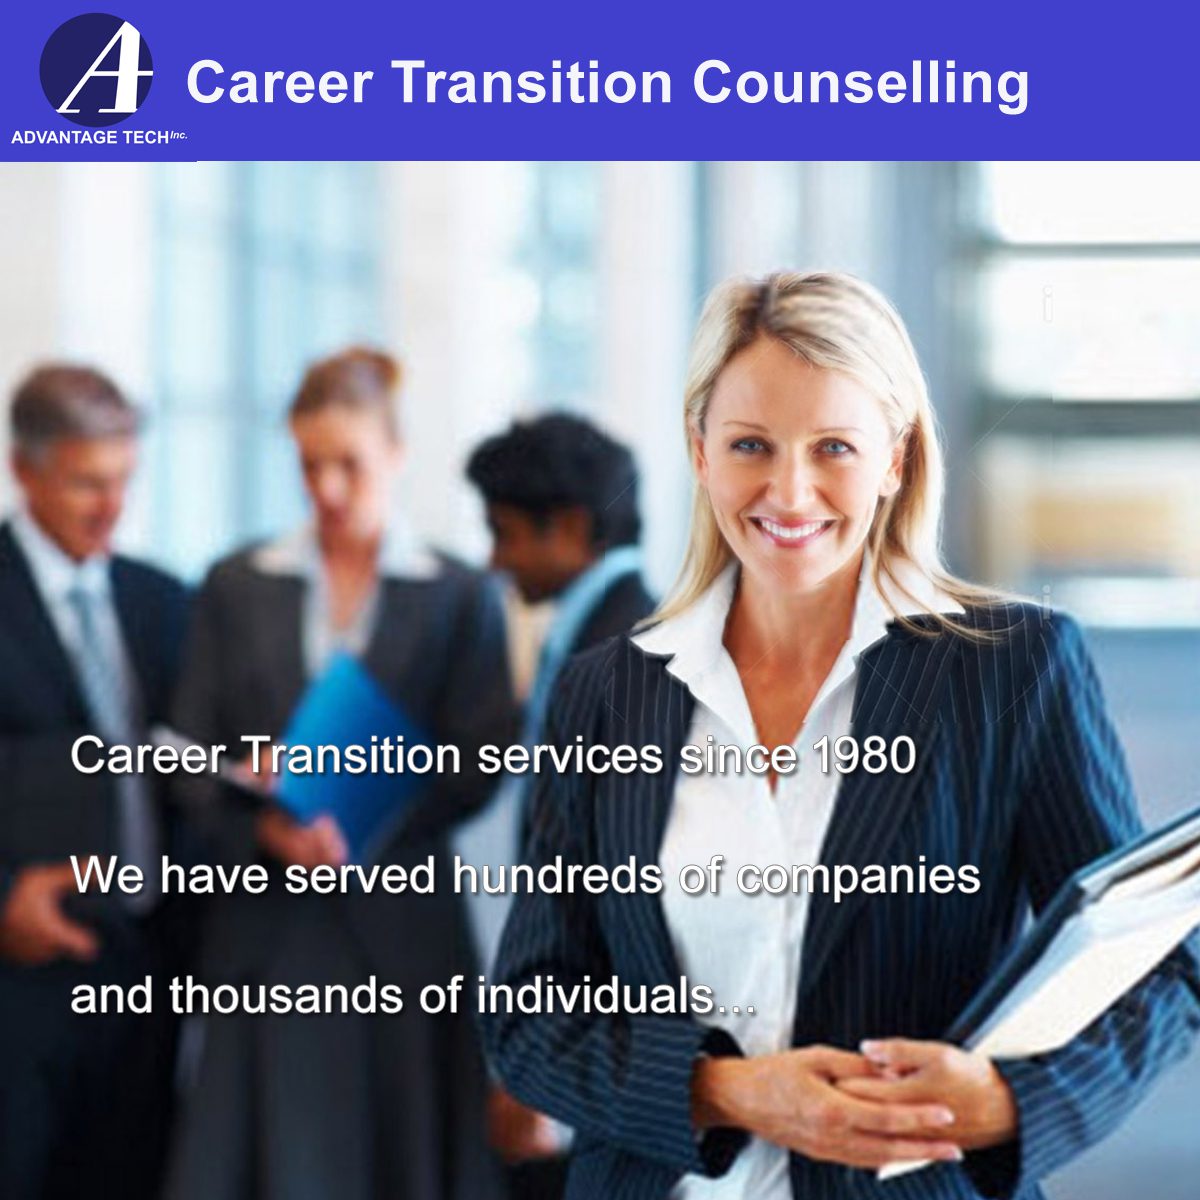 We have done a major update of our Career Transition website content